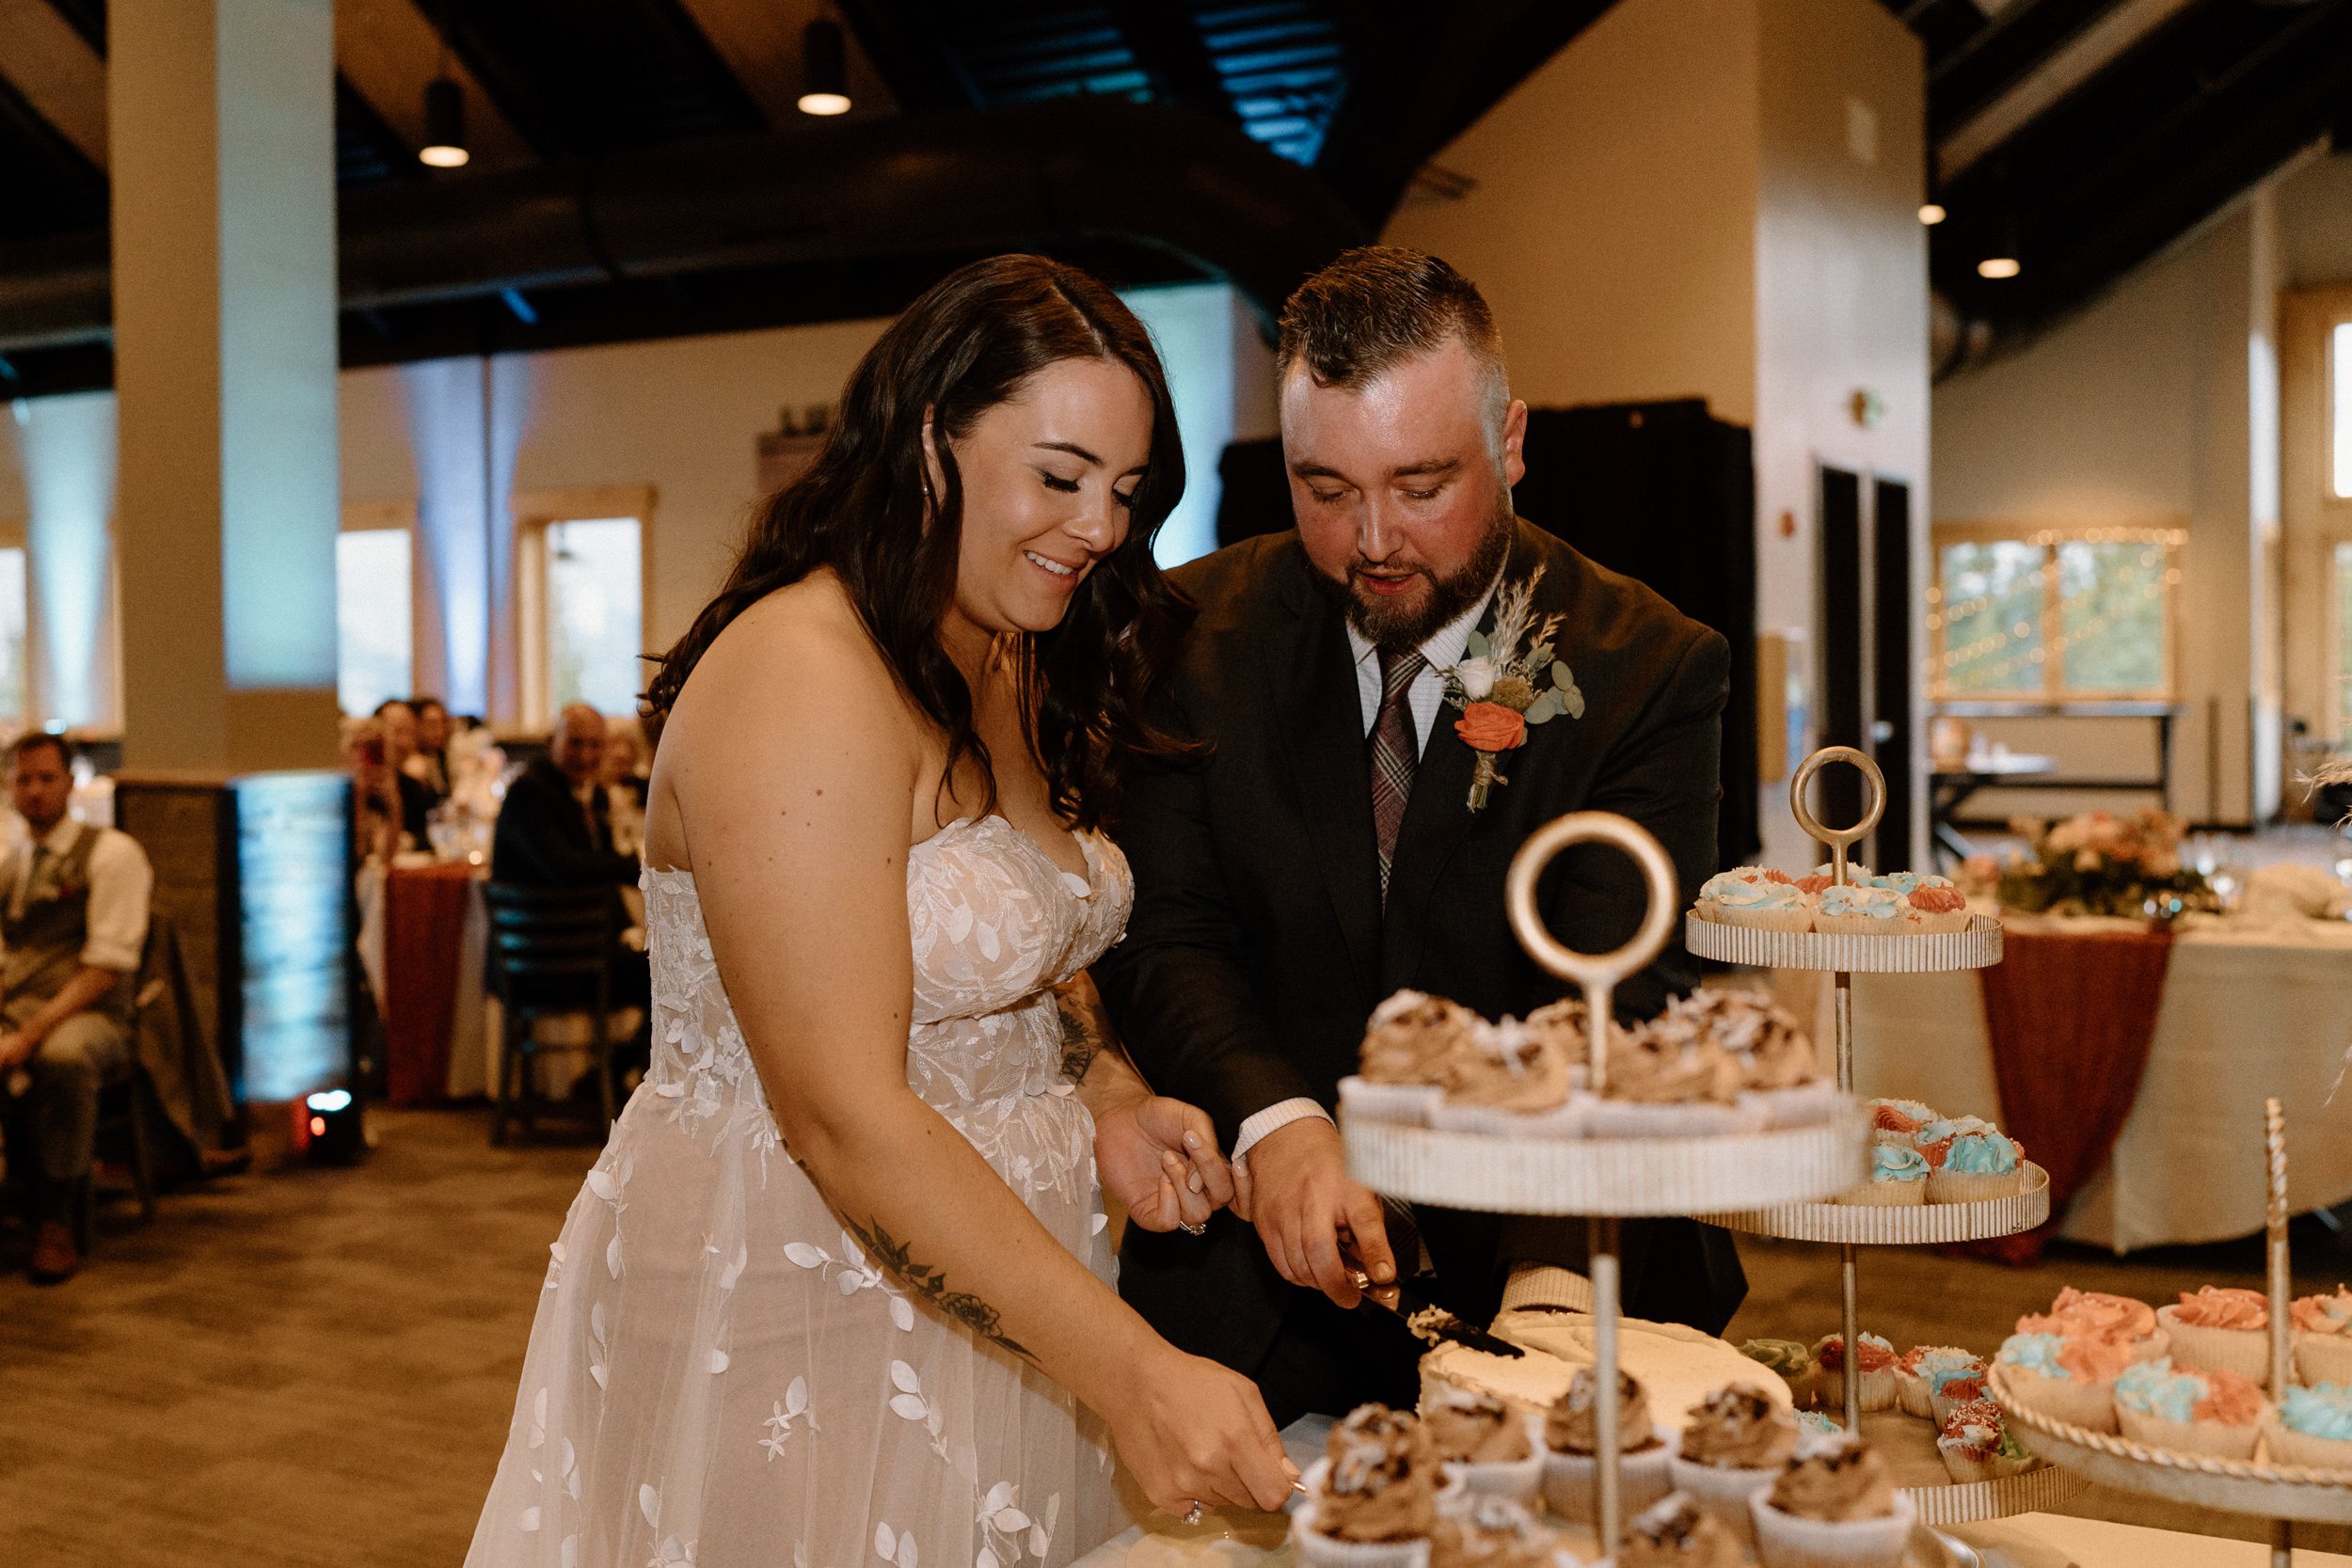 Bride and groom cut the wedding cake together